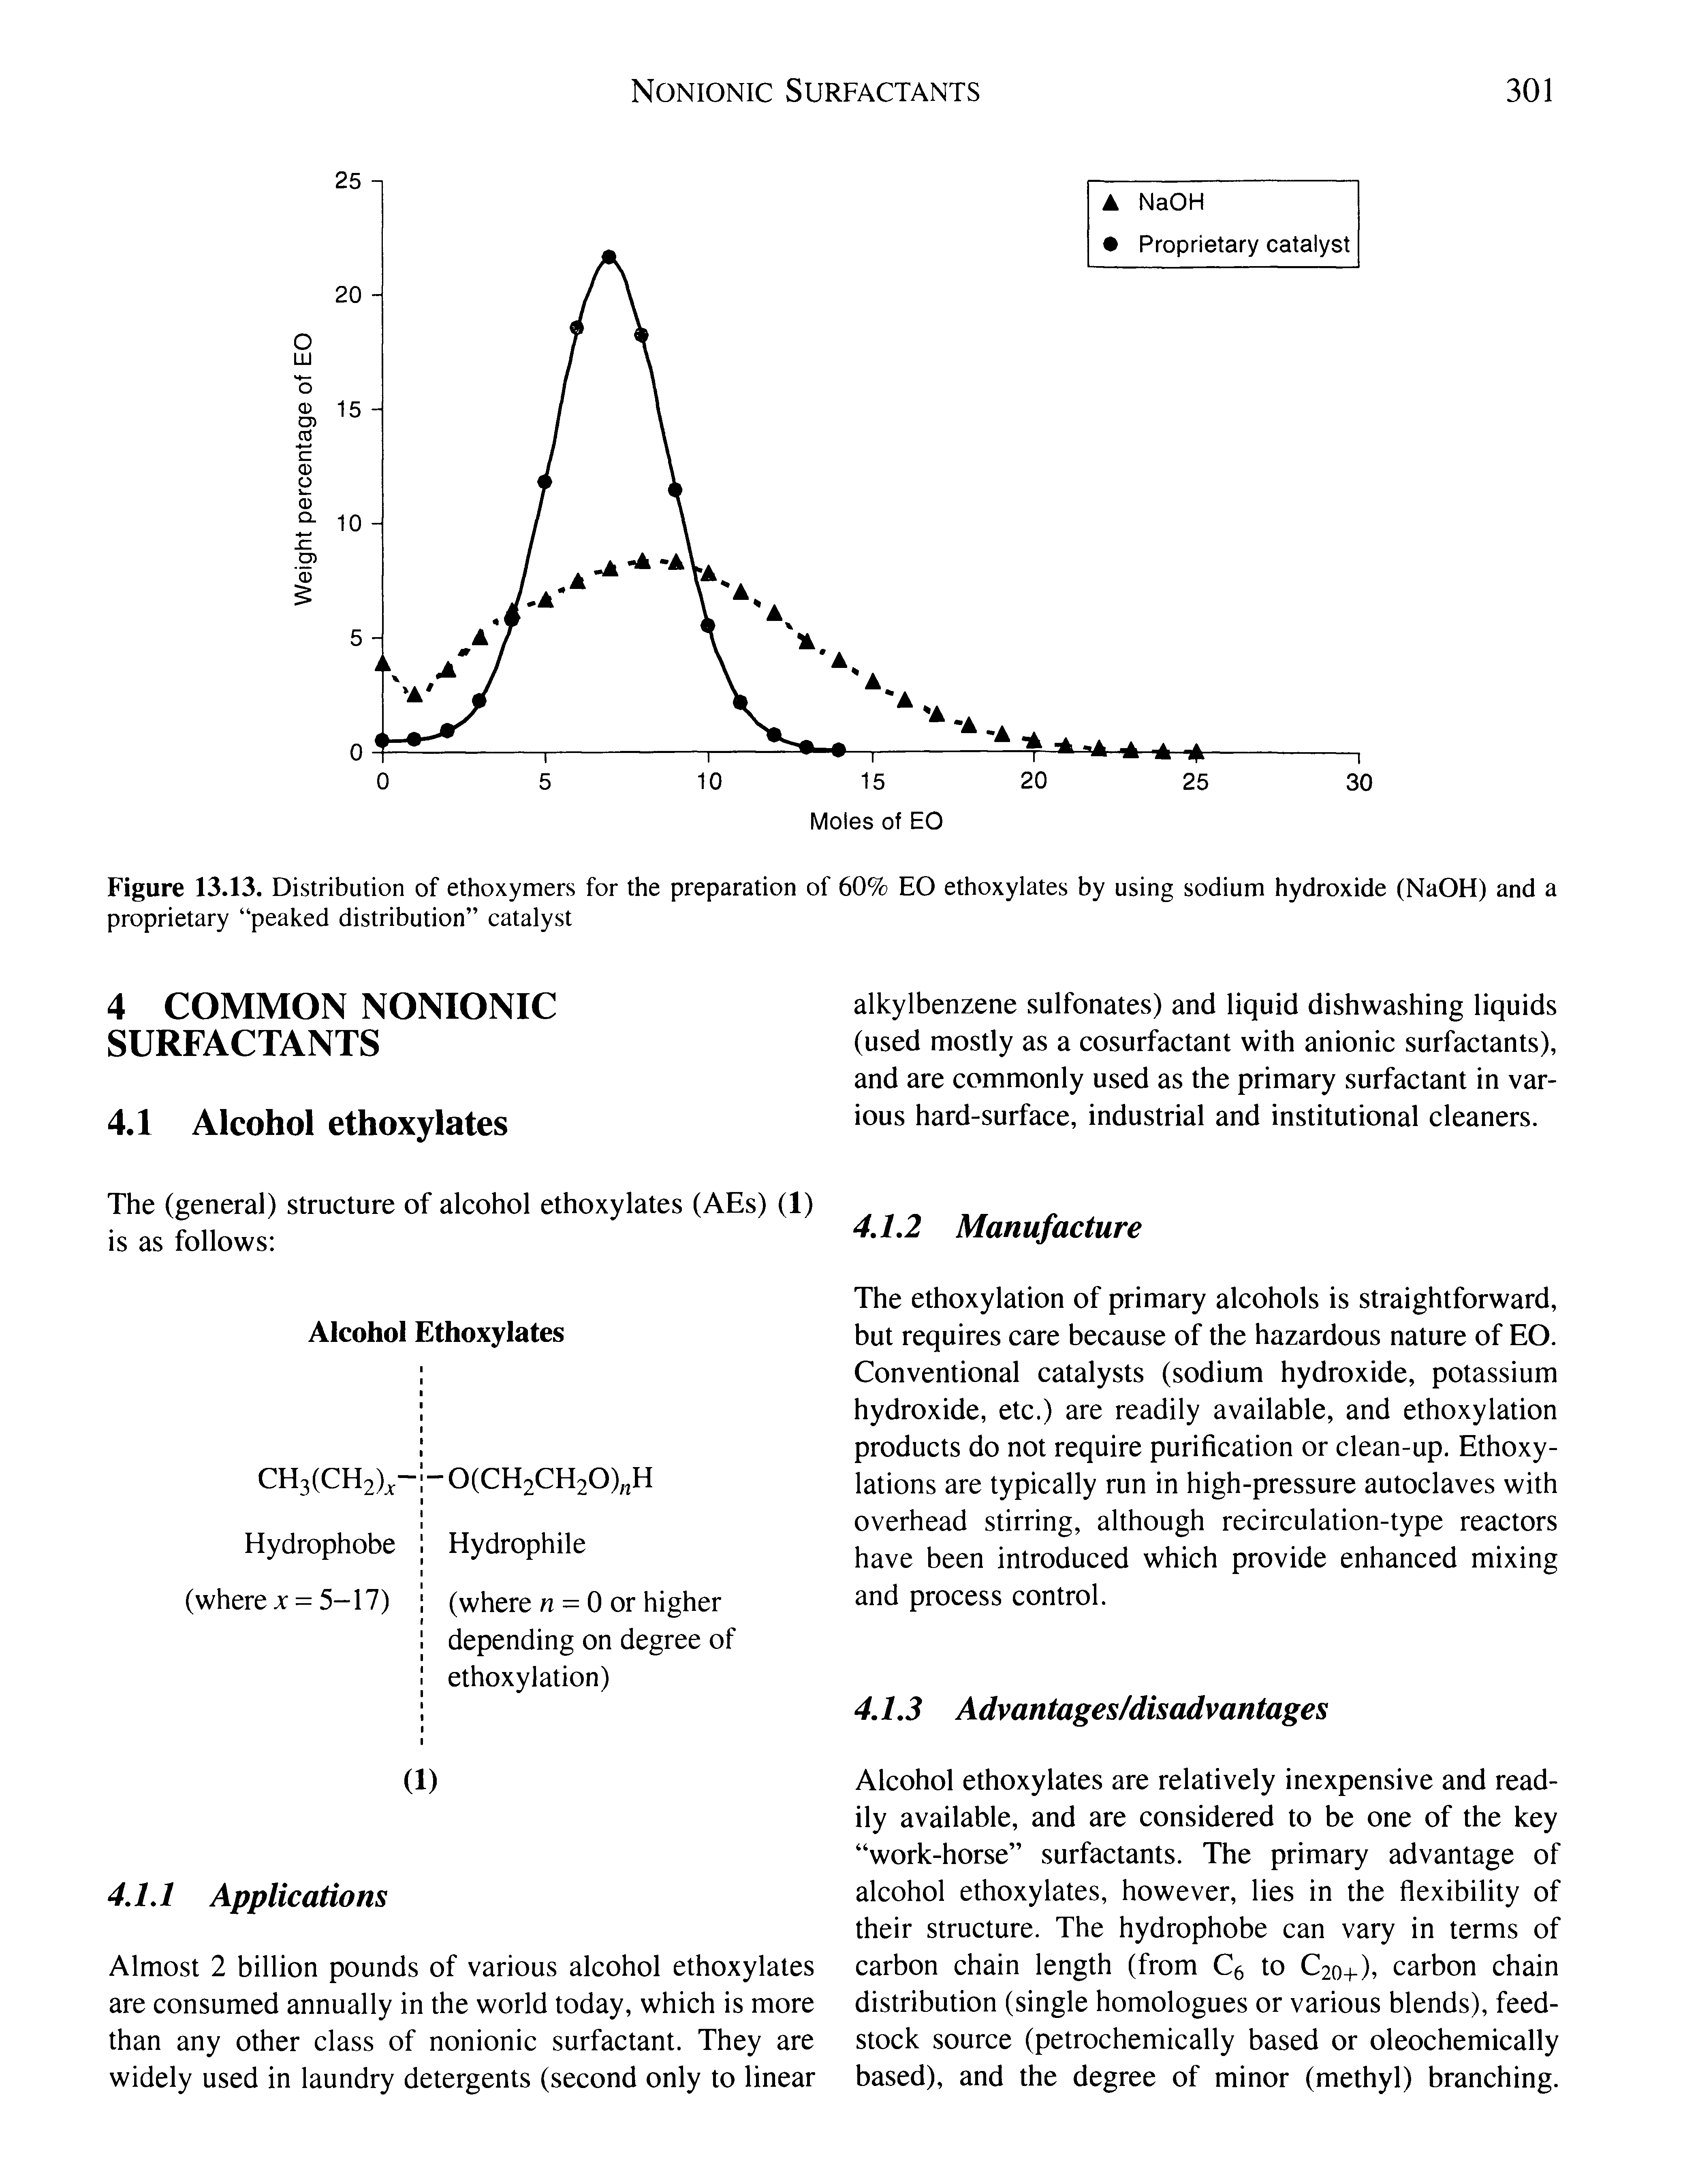 Figure 13.13. Distribution of ethoxymers for the preparation of 60% EO ethoxylates by using sodium hydroxide (NaOH) and a proprietary peaked distribution catalyst...